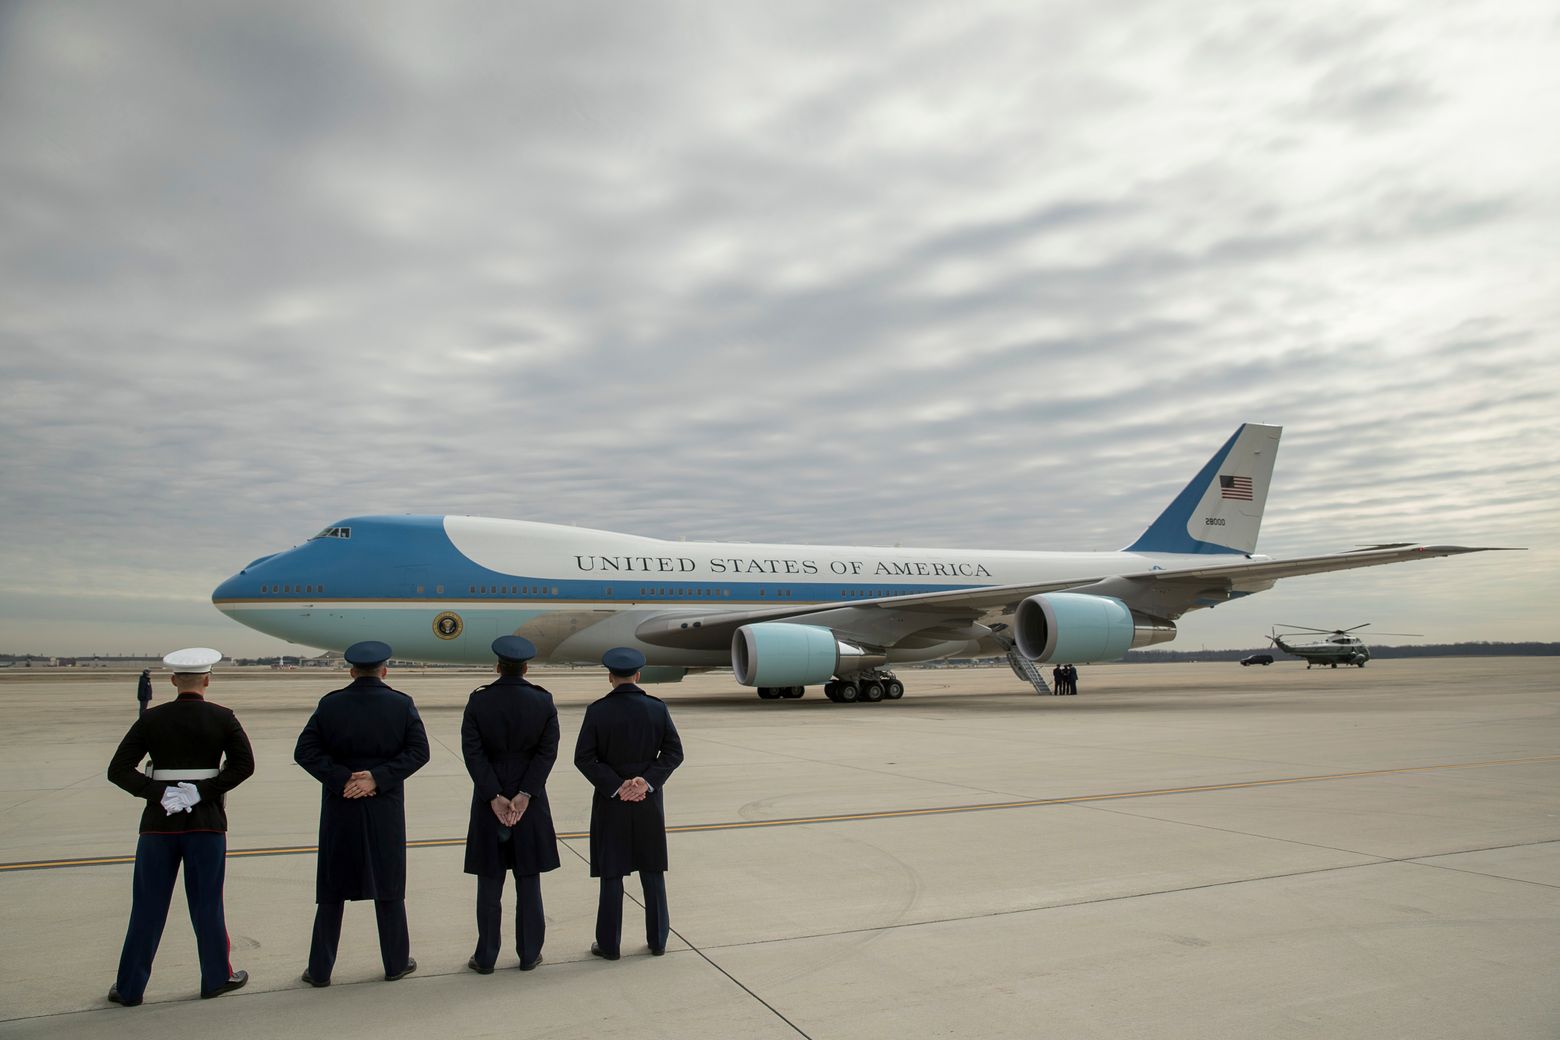 Fake story about Trump’s Air Force One hijacks Kirkland firm’s luxury airplane interiors